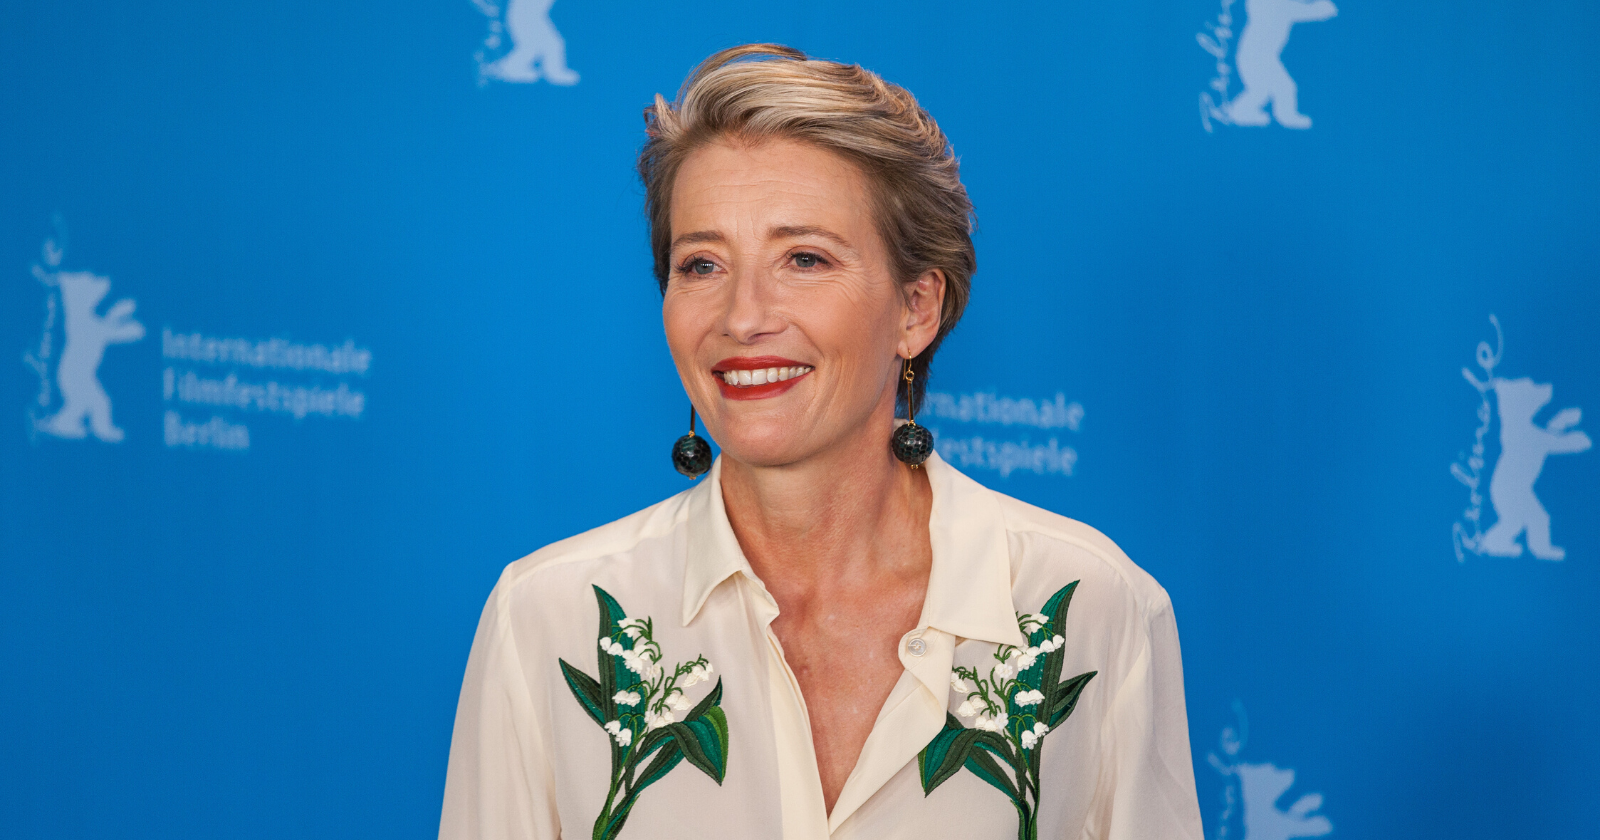 "It's very hard to be naked at 62": Emma Thompson confides in a difficult shoot